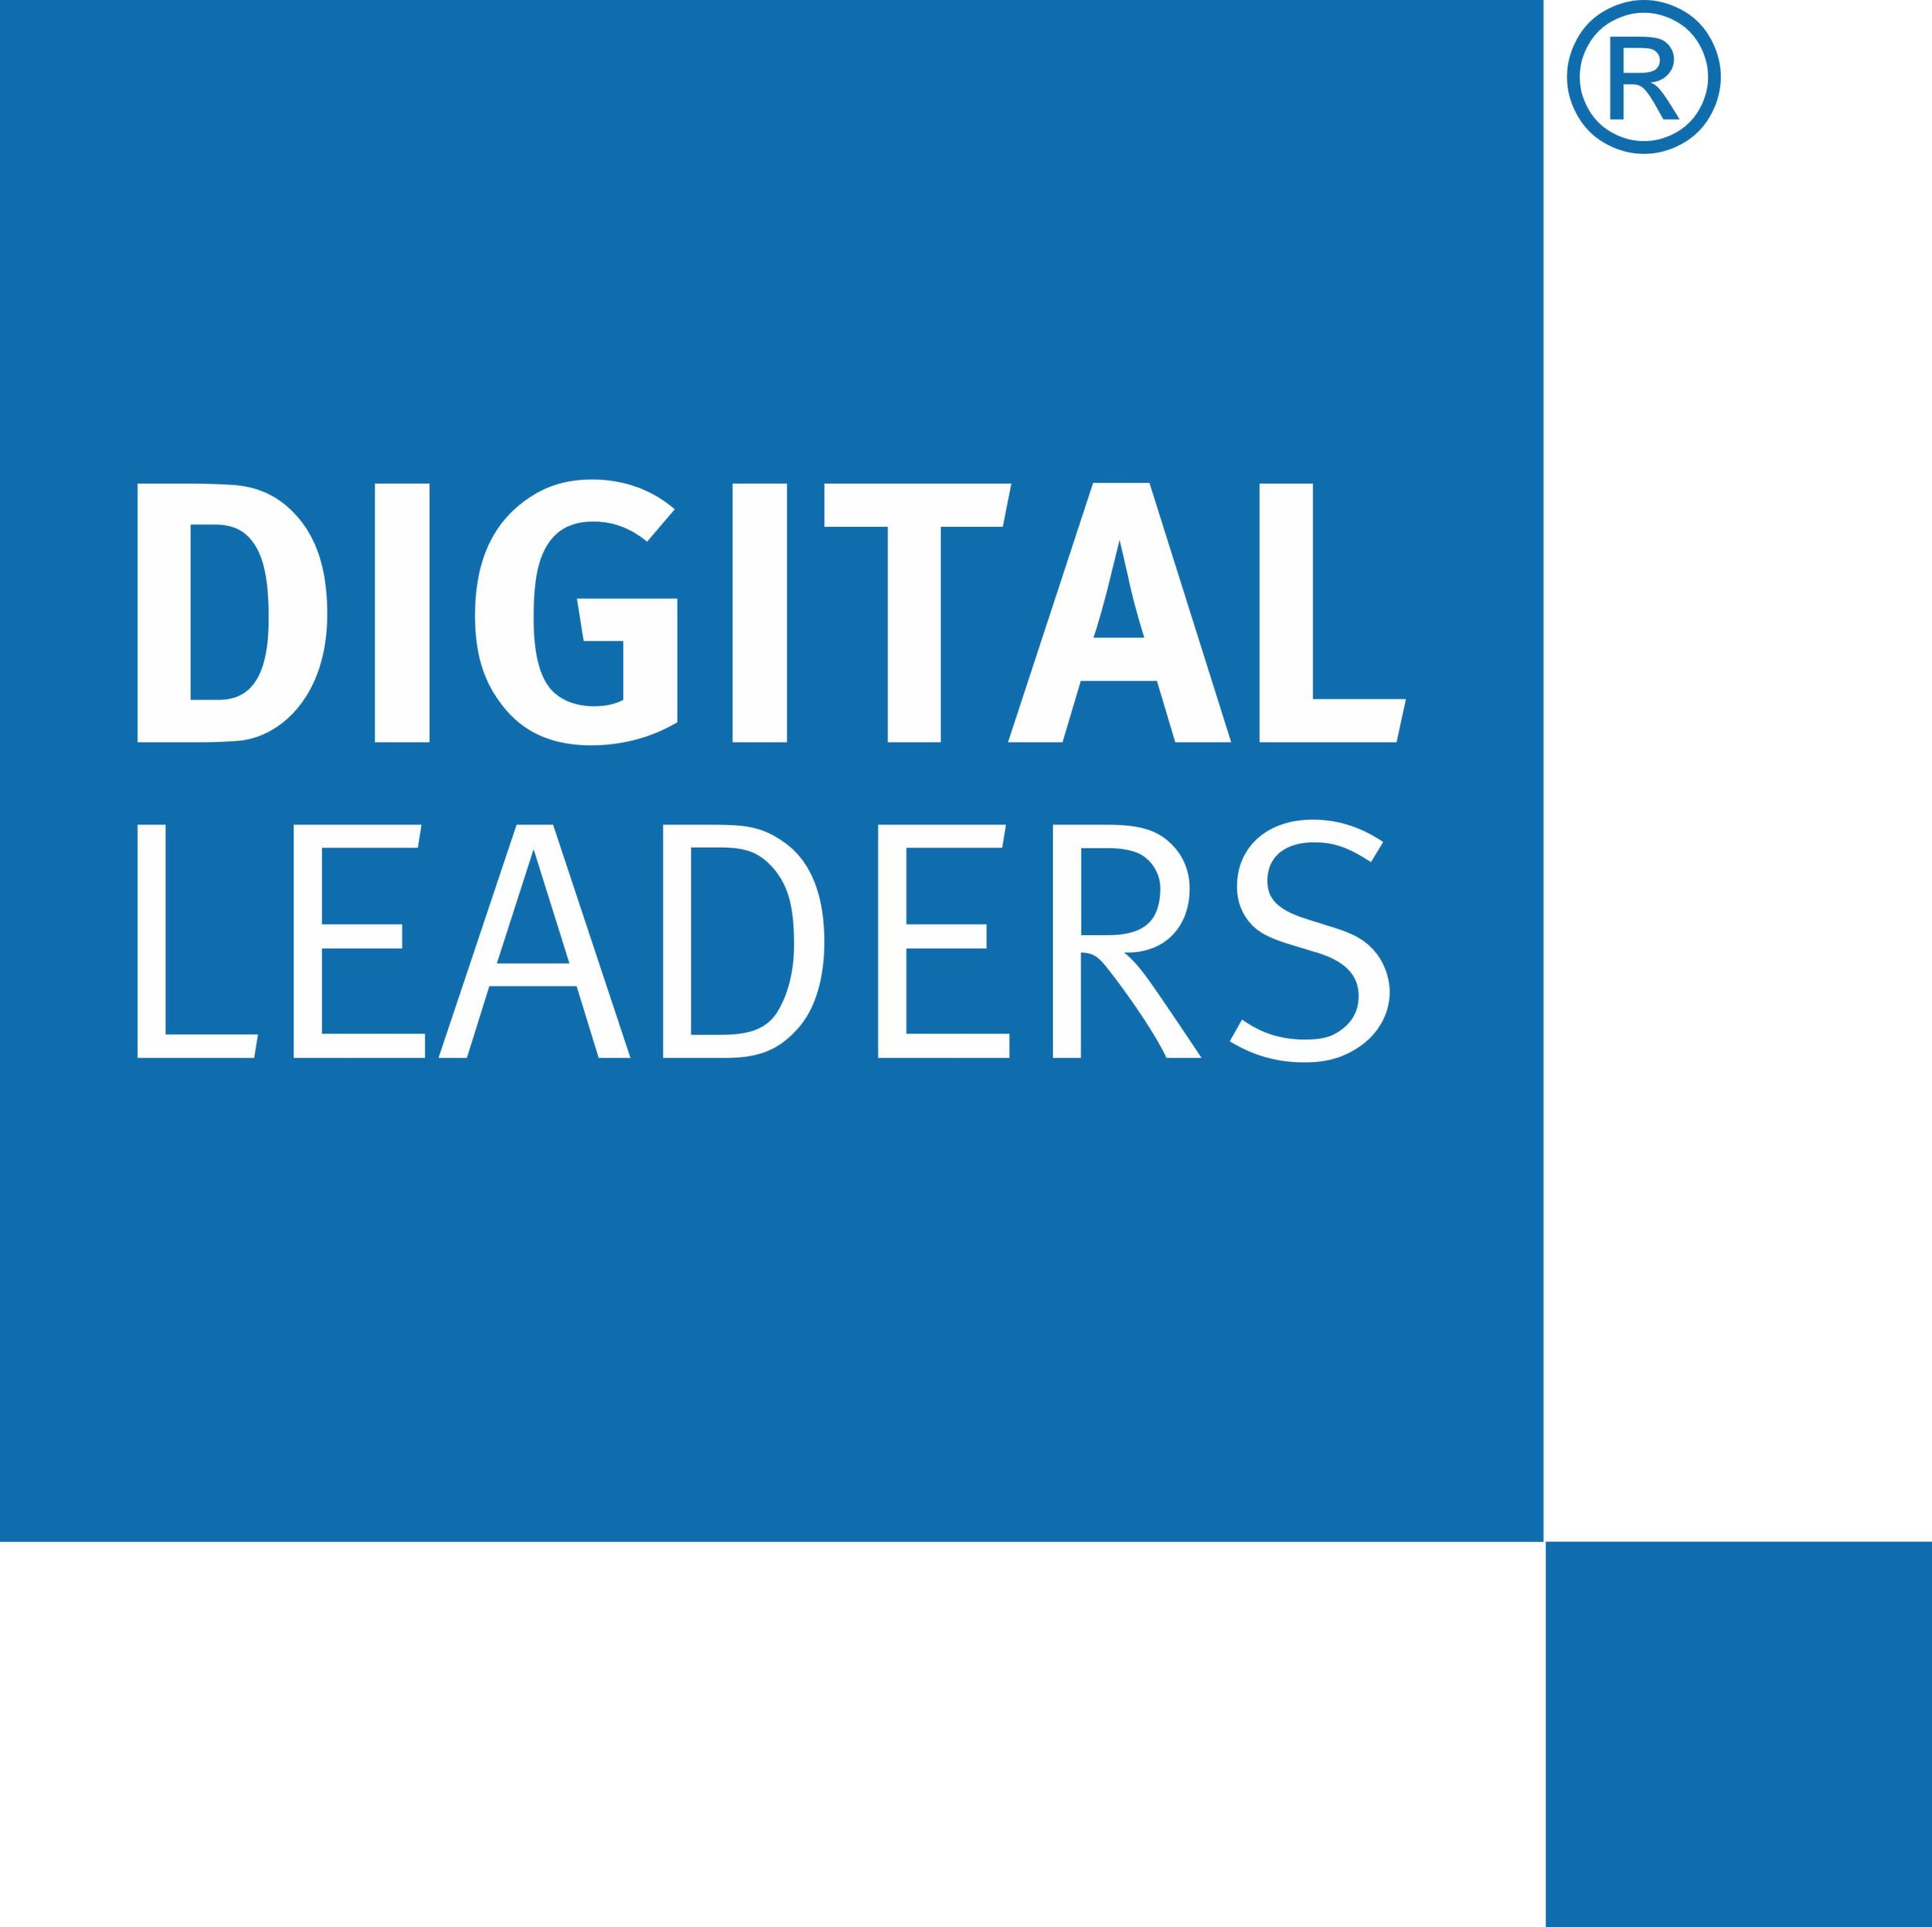 Image of Digital Leaders text in the middle of a blue square